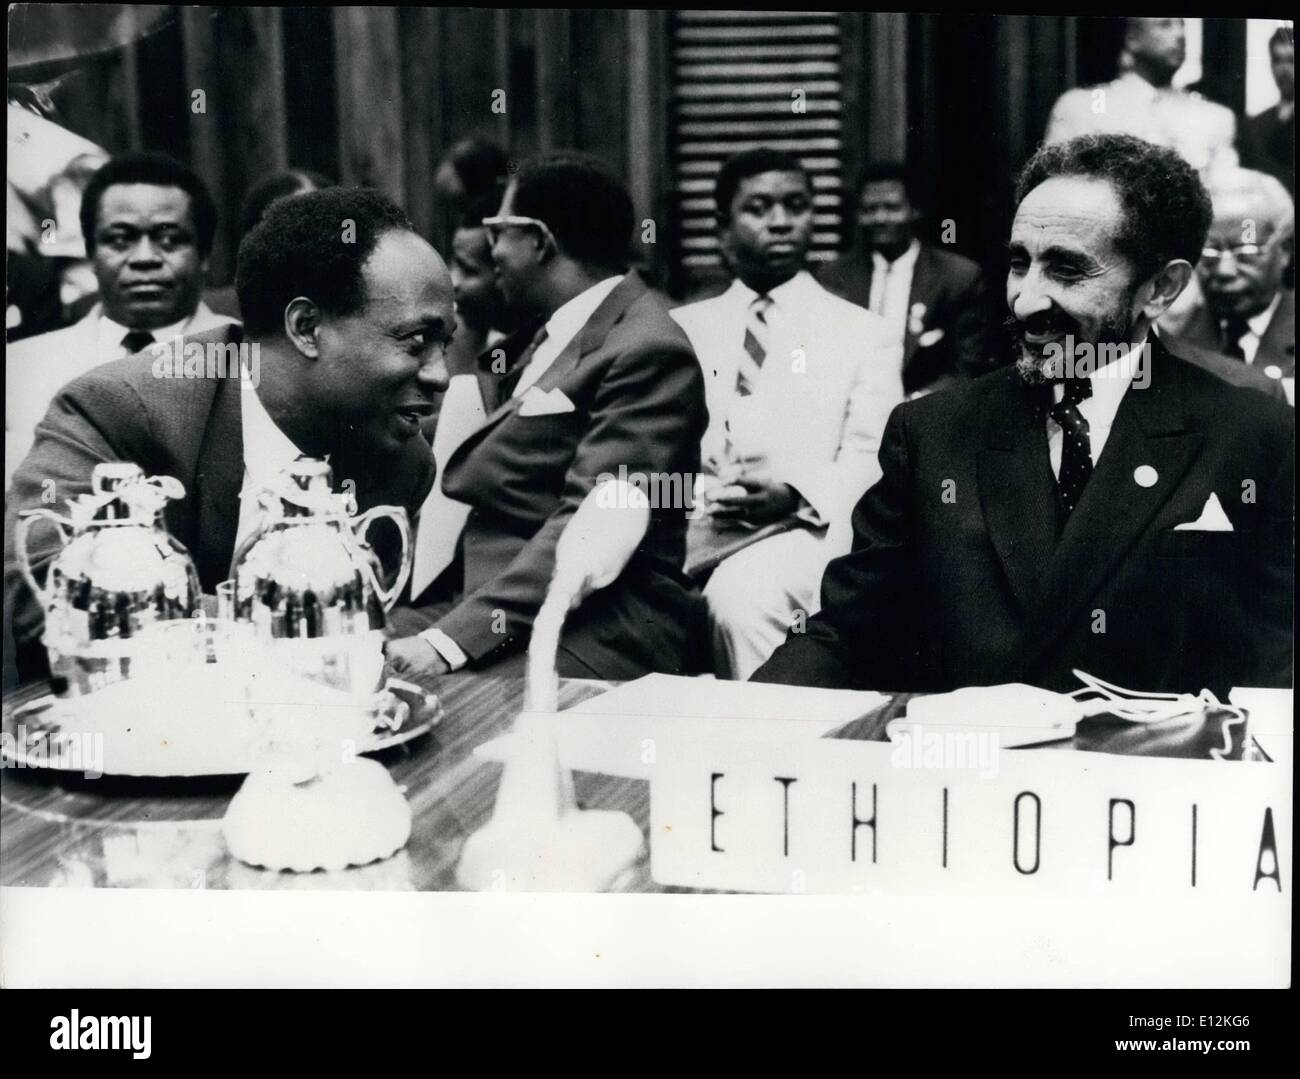 Feb. 24, 2012 - At the founding of the Oau in 1963 the emperor chats with another African leader who later lost his power : the Stock Photo